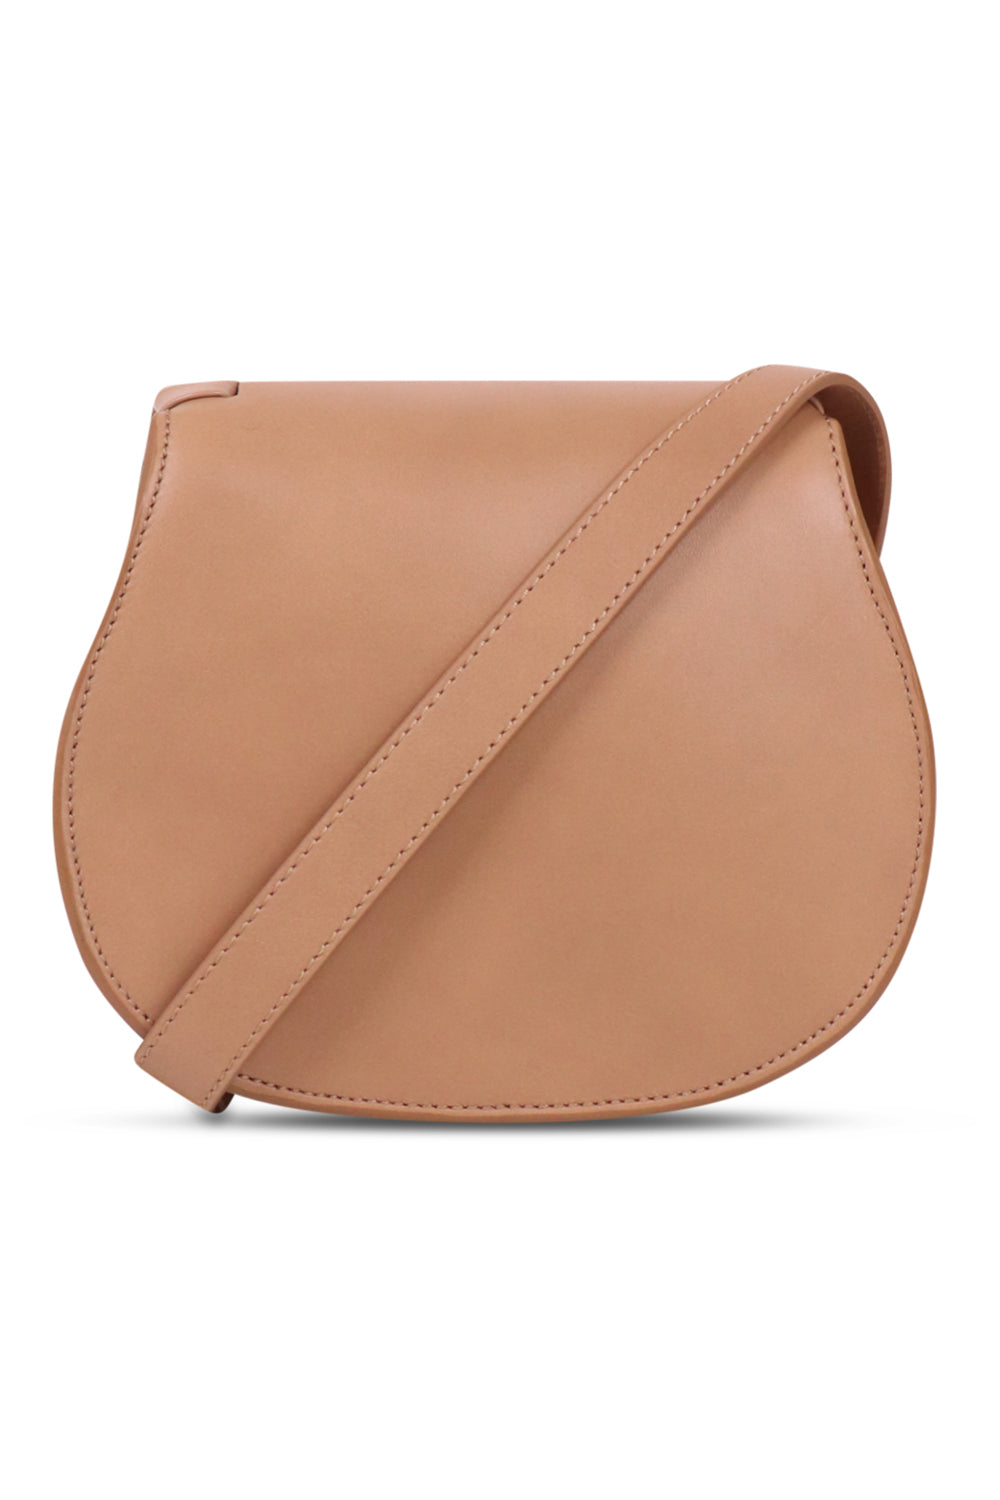 CHLOE Unclassified BROWN MARCIE SMALL BAG | LIGHT TAN WITH TONAL WHIP STITCHING